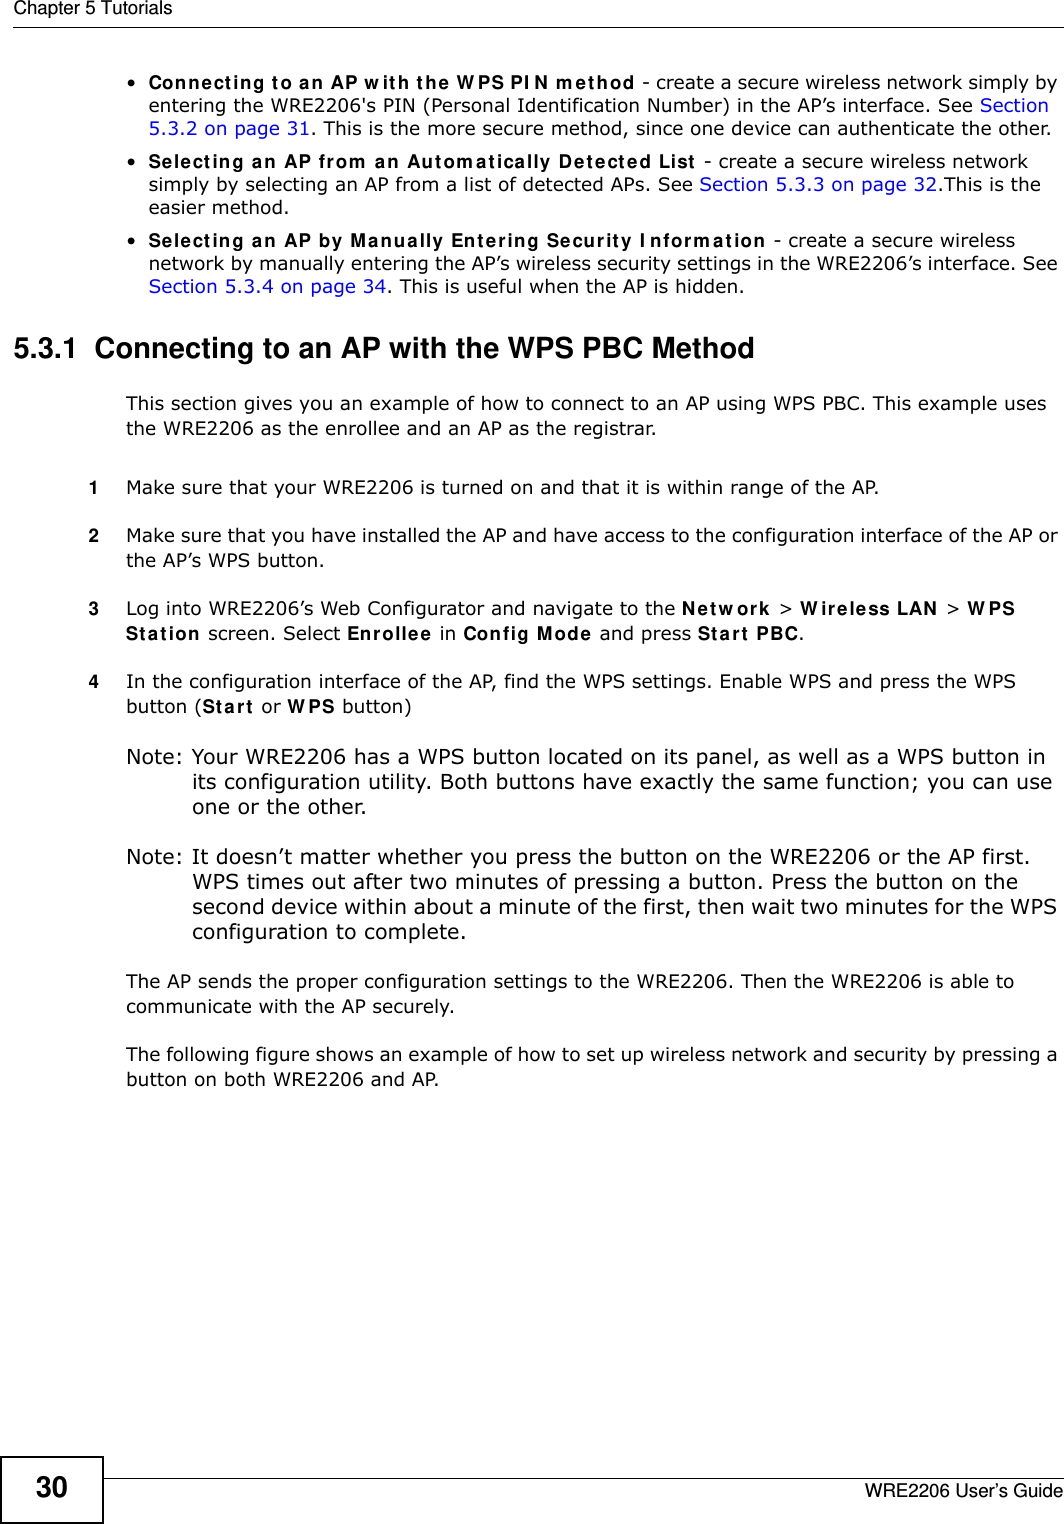 Chapter 5 TutorialsWRE2206 User’s Guide30•Con n e ct i n g  t o  a n  AP  w i t h  t h e  W PS PI N  m e t h o d  - create a secure wireless network simply by entering the WRE2206&apos;s PIN (Personal Identification Number) in the AP’s interface. See Section 5.3.2 on page 31. This is the more secure method, since one device can authenticate the other.•Select ing a n AP from  a n Au t om at ically D e t e ct e d List  - create a secure wireless network simply by selecting an AP from a list of detected APs. See Section 5.3.3 on page 32.This is the easier method.•Select ing a n AP by M a n ually Ent e r in g Se cur it y I nform a t ion - create a secure wireless network by manually entering the AP’s wireless security settings in the WRE2206’s interface. See Section 5.3.4 on page 34. This is useful when the AP is hidden.5.3.1  Connecting to an AP with the WPS PBC MethodThis section gives you an example of how to connect to an AP using WPS PBC. This example uses the WRE2206 as the enrollee and an AP as the registrar.1Make sure that your WRE2206 is turned on and that it is within range of the AP. 2Make sure that you have installed the AP and have access to the configuration interface of the AP or the AP’s WPS button.3Log into WRE2206’s Web Configurator and navigate to the N e t w or k  &gt; W irele ss LAN  &gt; W PS St a t ion  screen. Select Enrolle e  in Config M ode and press Start  PBC.4In the configuration interface of the AP, find the WPS settings. Enable WPS and press the WPS button (Start  or W PS button)Note: Your WRE2206 has a WPS button located on its panel, as well as a WPS button in its configuration utility. Both buttons have exactly the same function; you can use one or the other.Note: It doesn’t matter whether you press the button on the WRE2206 or the AP first. WPS times out after two minutes of pressing a button. Press the button on the second device within about a minute of the first, then wait two minutes for the WPS configuration to complete.  The AP sends the proper configuration settings to the WRE2206. Then the WRE2206 is able to communicate with the AP securely. The following figure shows an example of how to set up wireless network and security by pressing a button on both WRE2206 and AP.